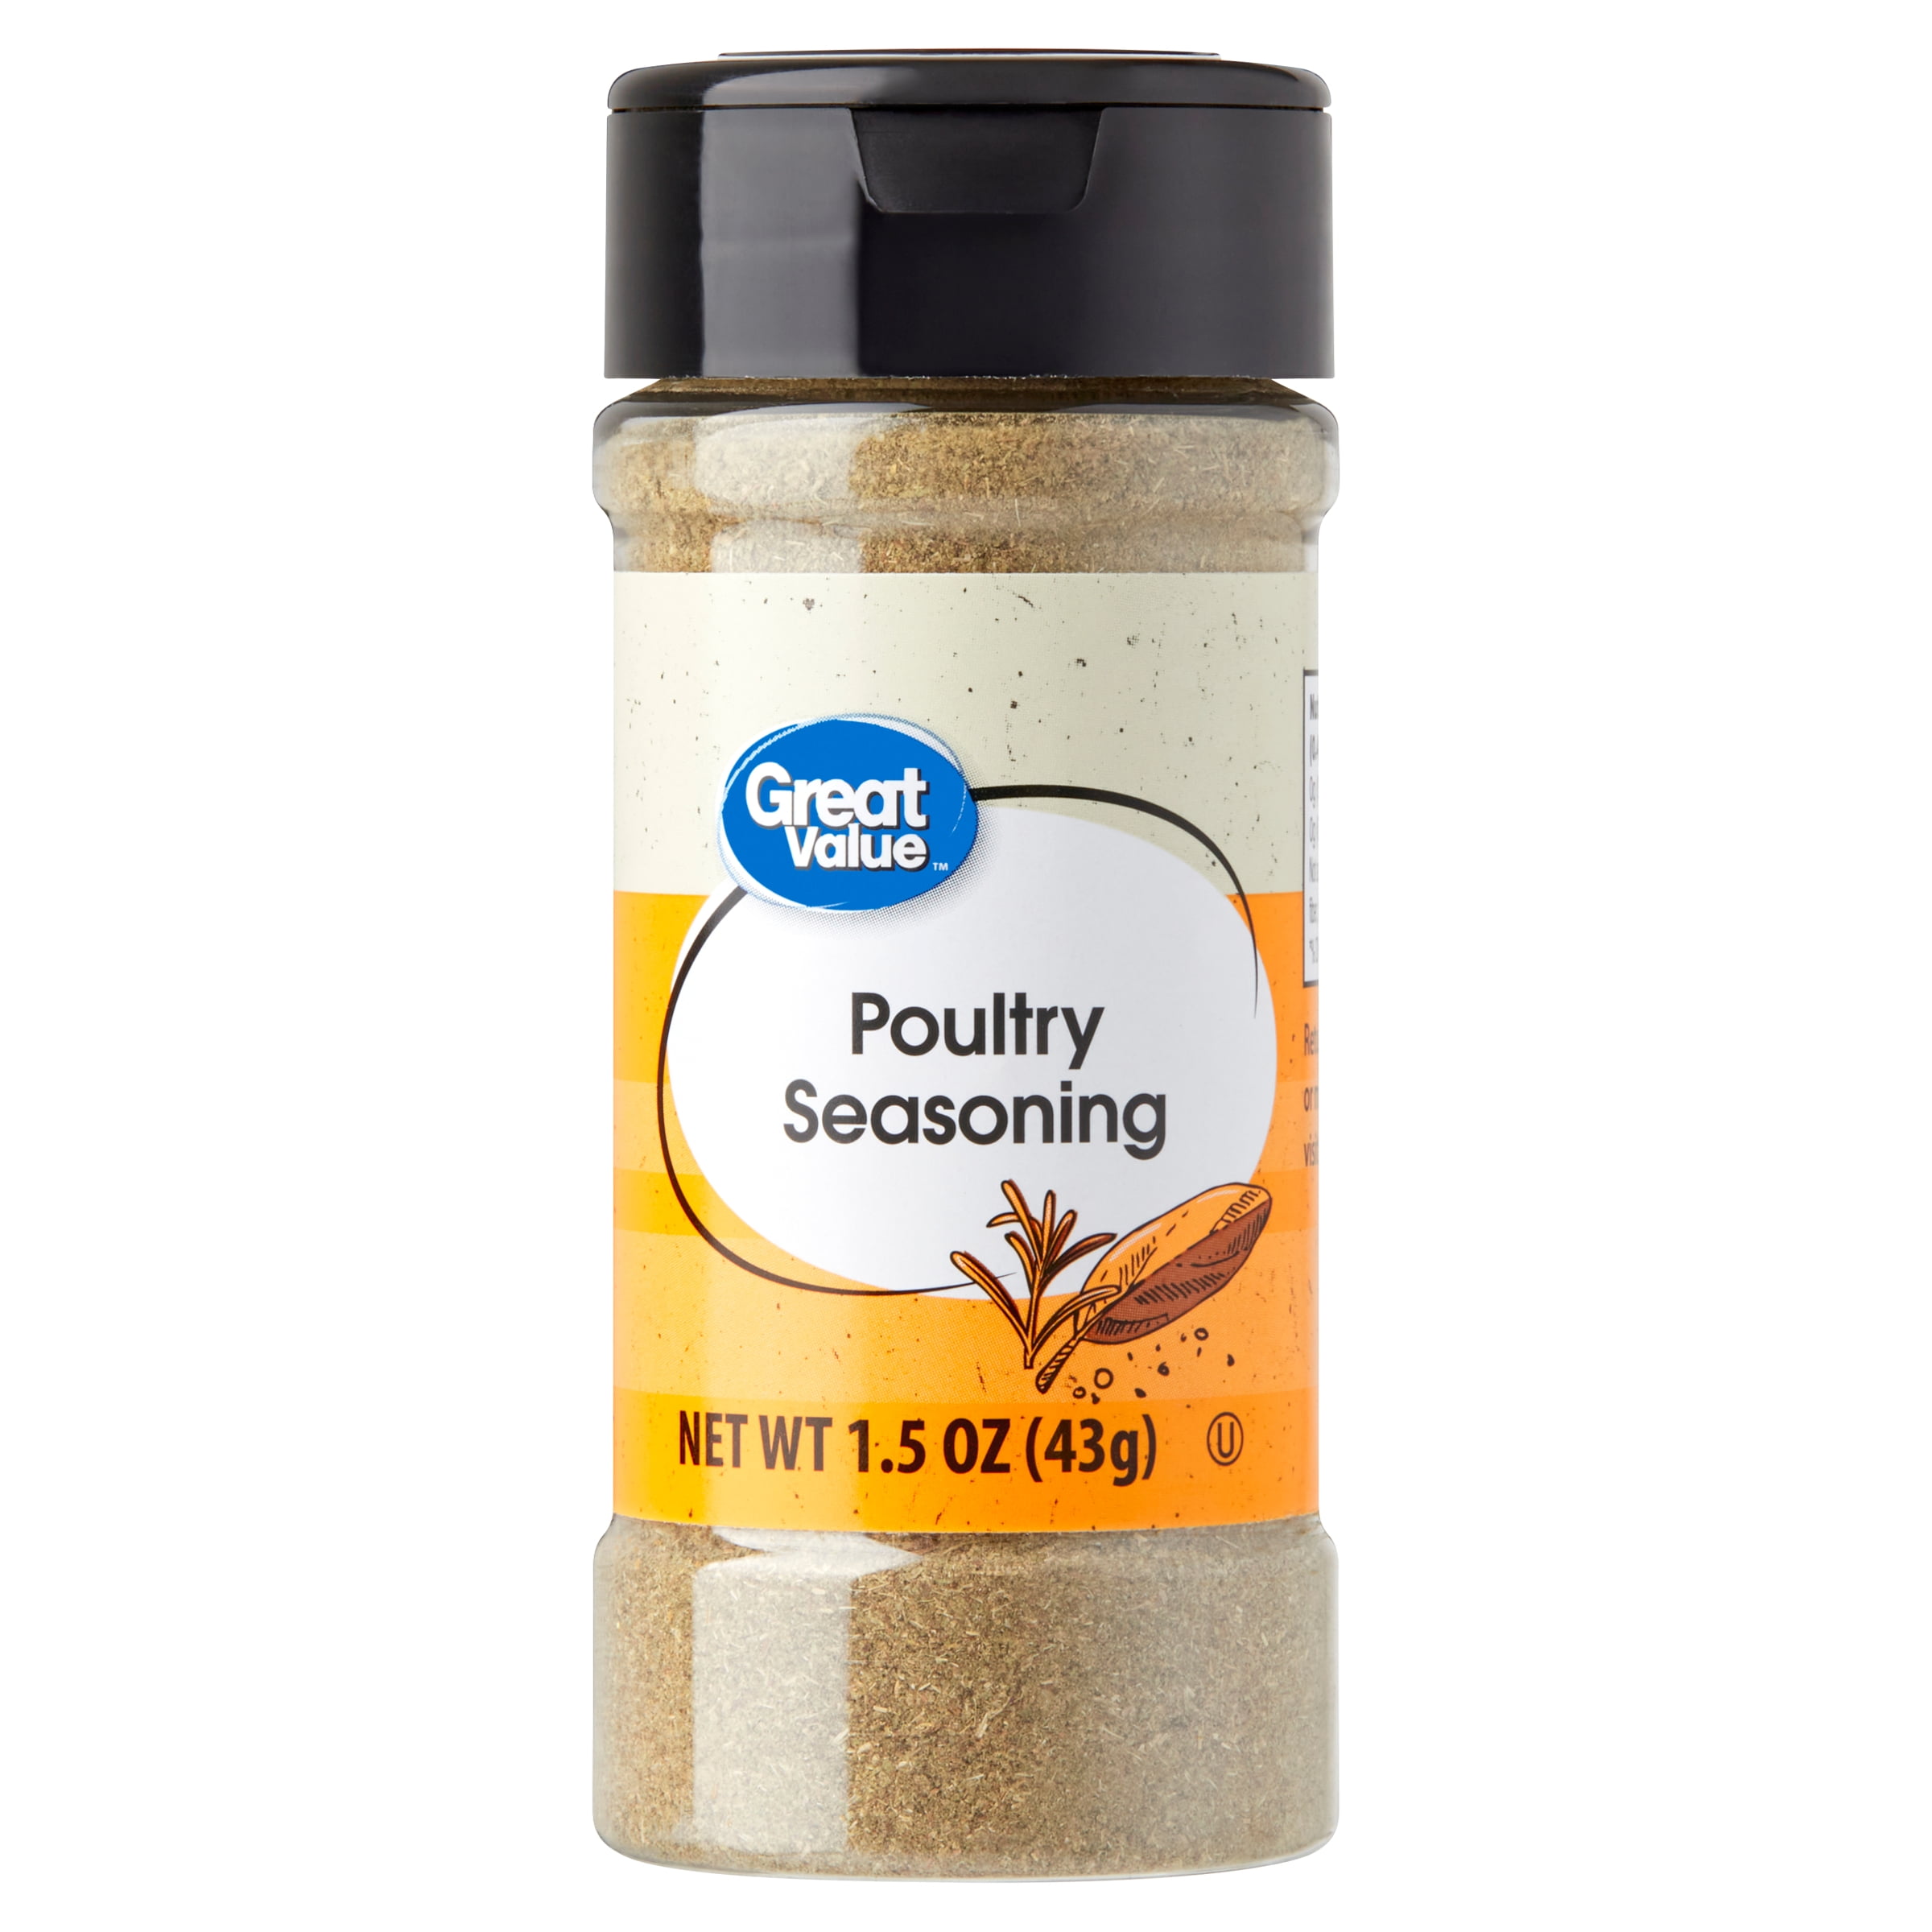 What Is Poultry Seasoning?